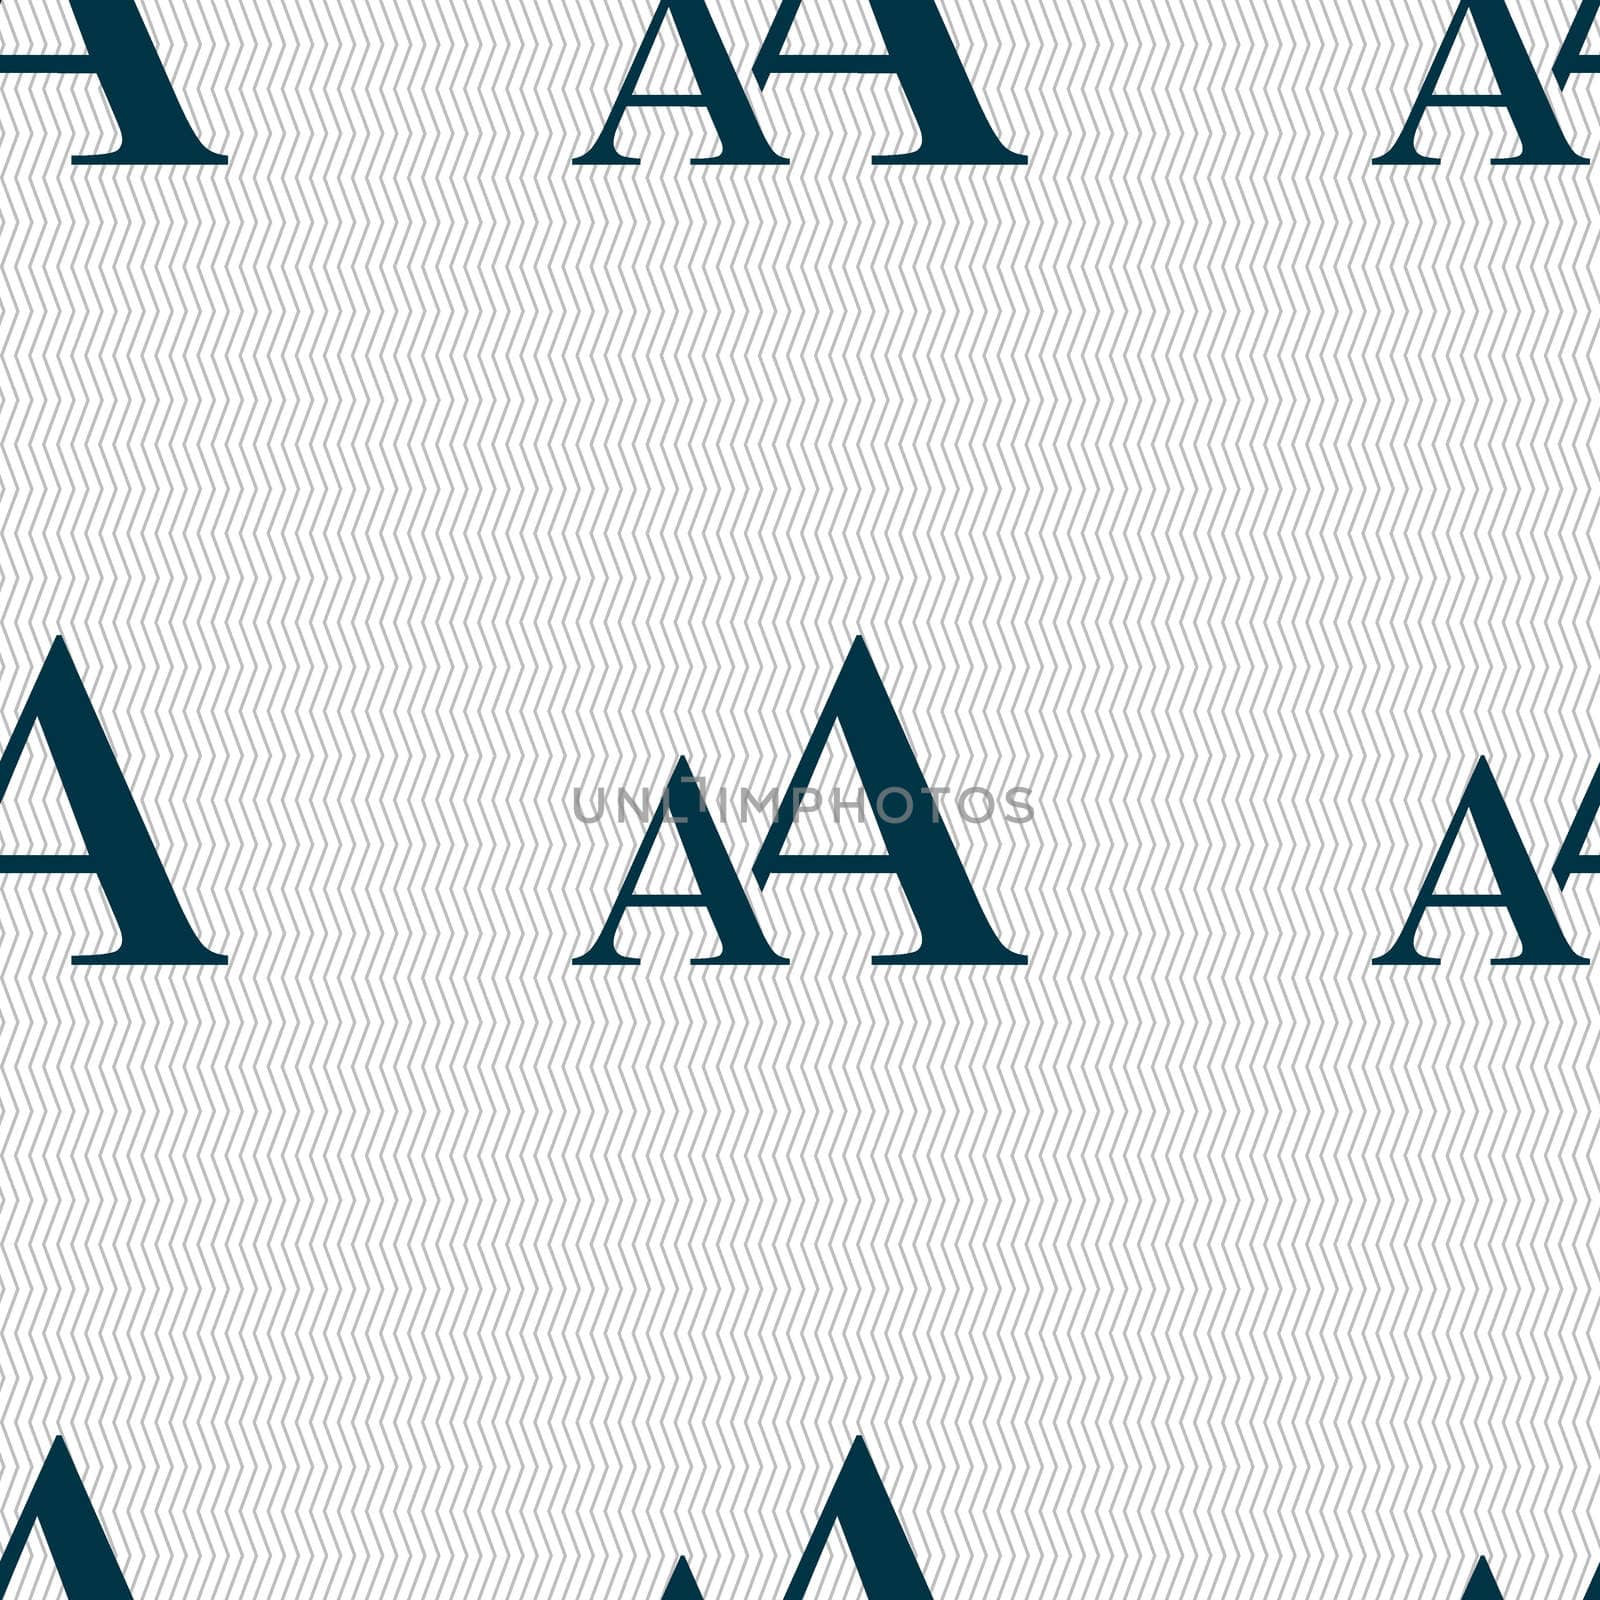 Enlarge font, AA icon sign. Seamless abstract background with geometric shapes. illustration